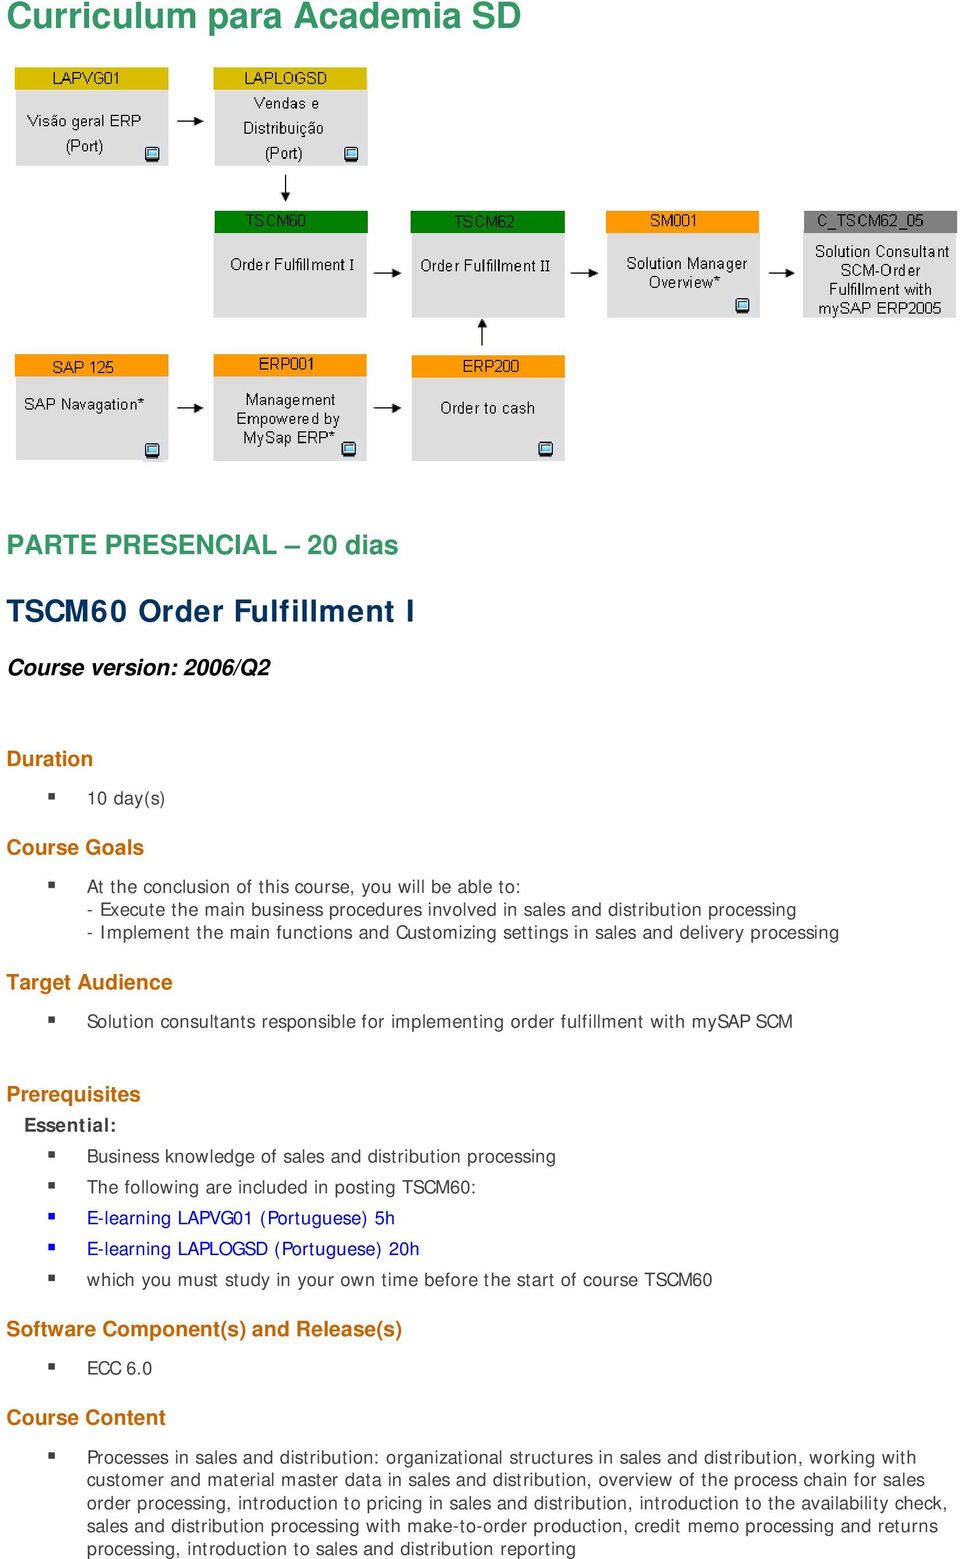 implementing order fulfillment with mysap SCM Business knowledge of sales and distribution processing The following are included in posting TSCM60: E-learning LAPVG01 (Portuguese) 5h E-learning